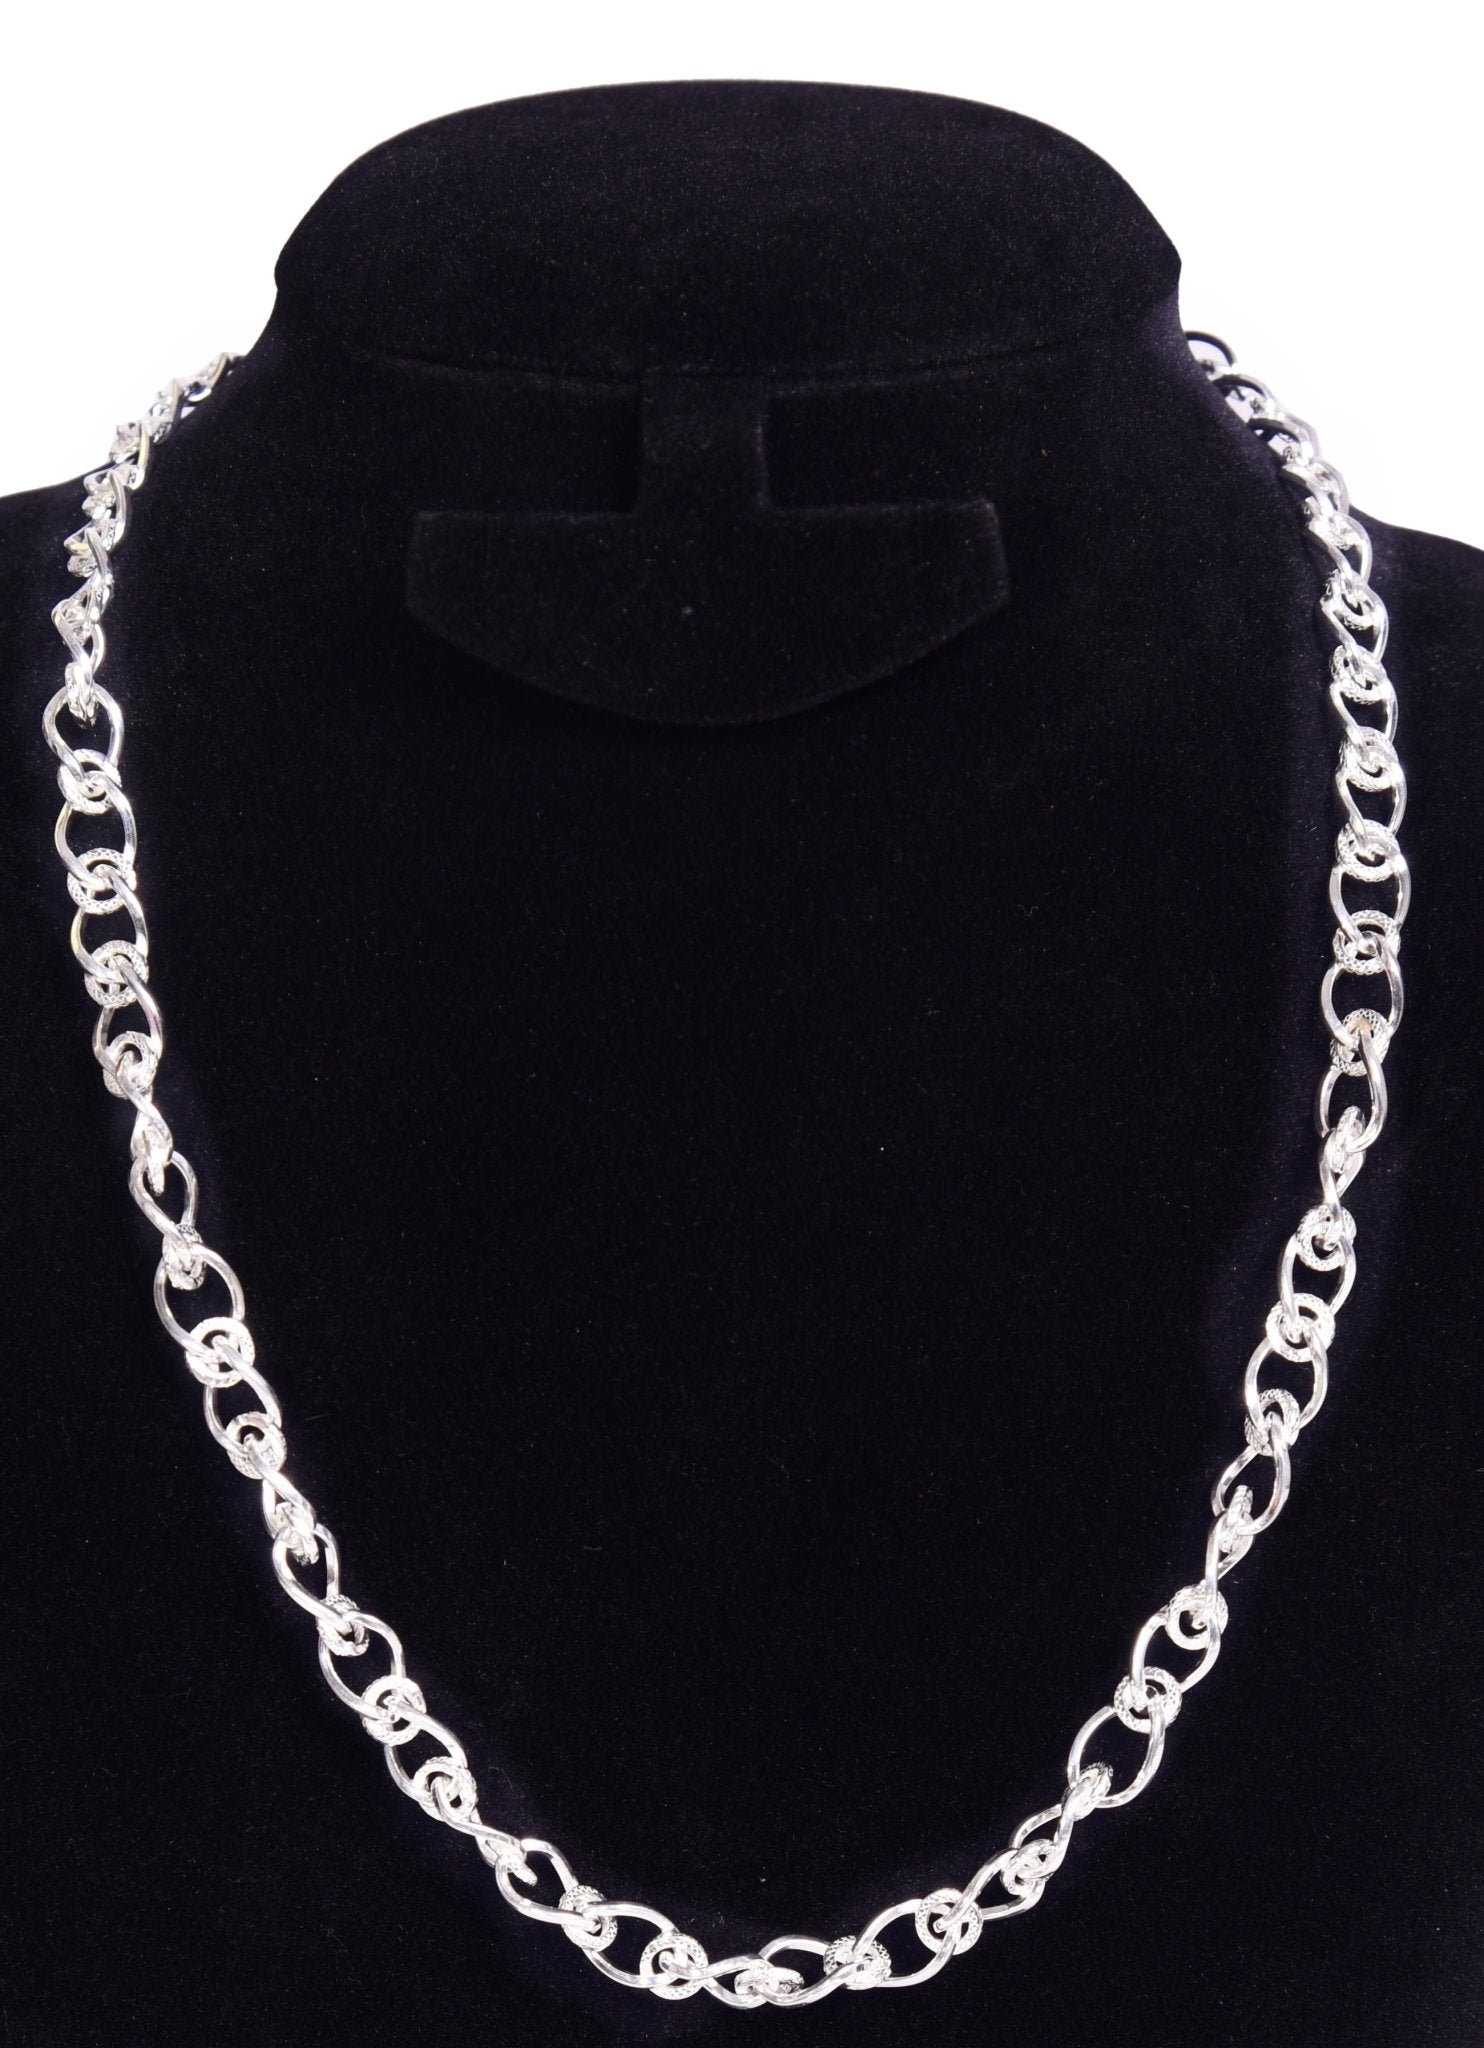 Elevated Aesthetic Silver Link Chain | 925 Silver with Rhodium Plating | Men's Chain - Indique